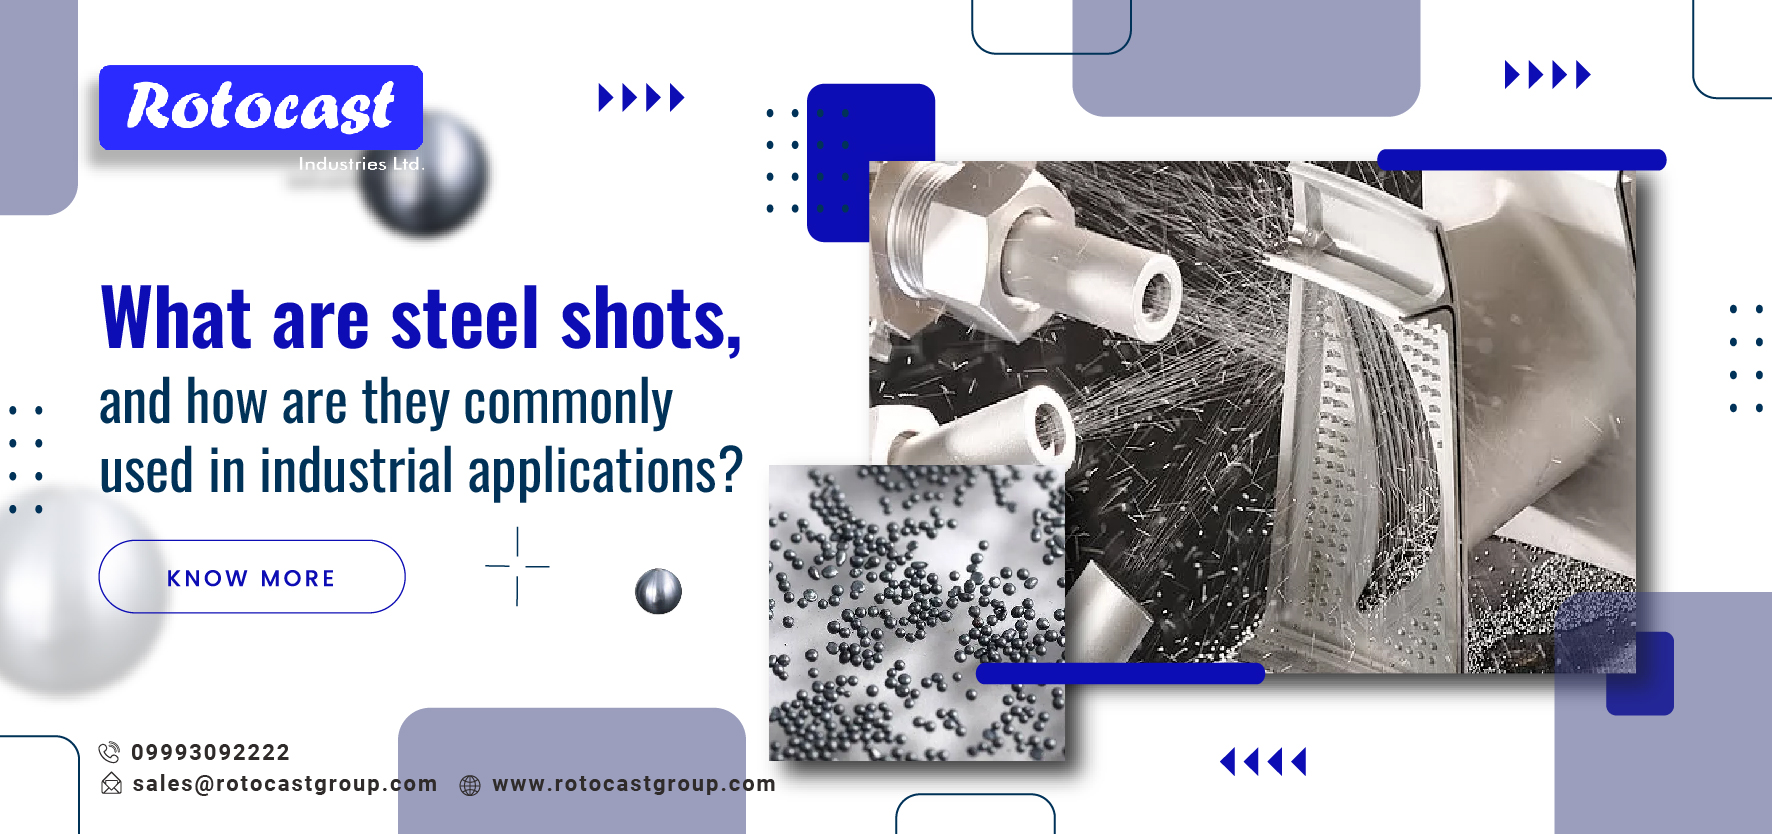 What is rotocast steel shots